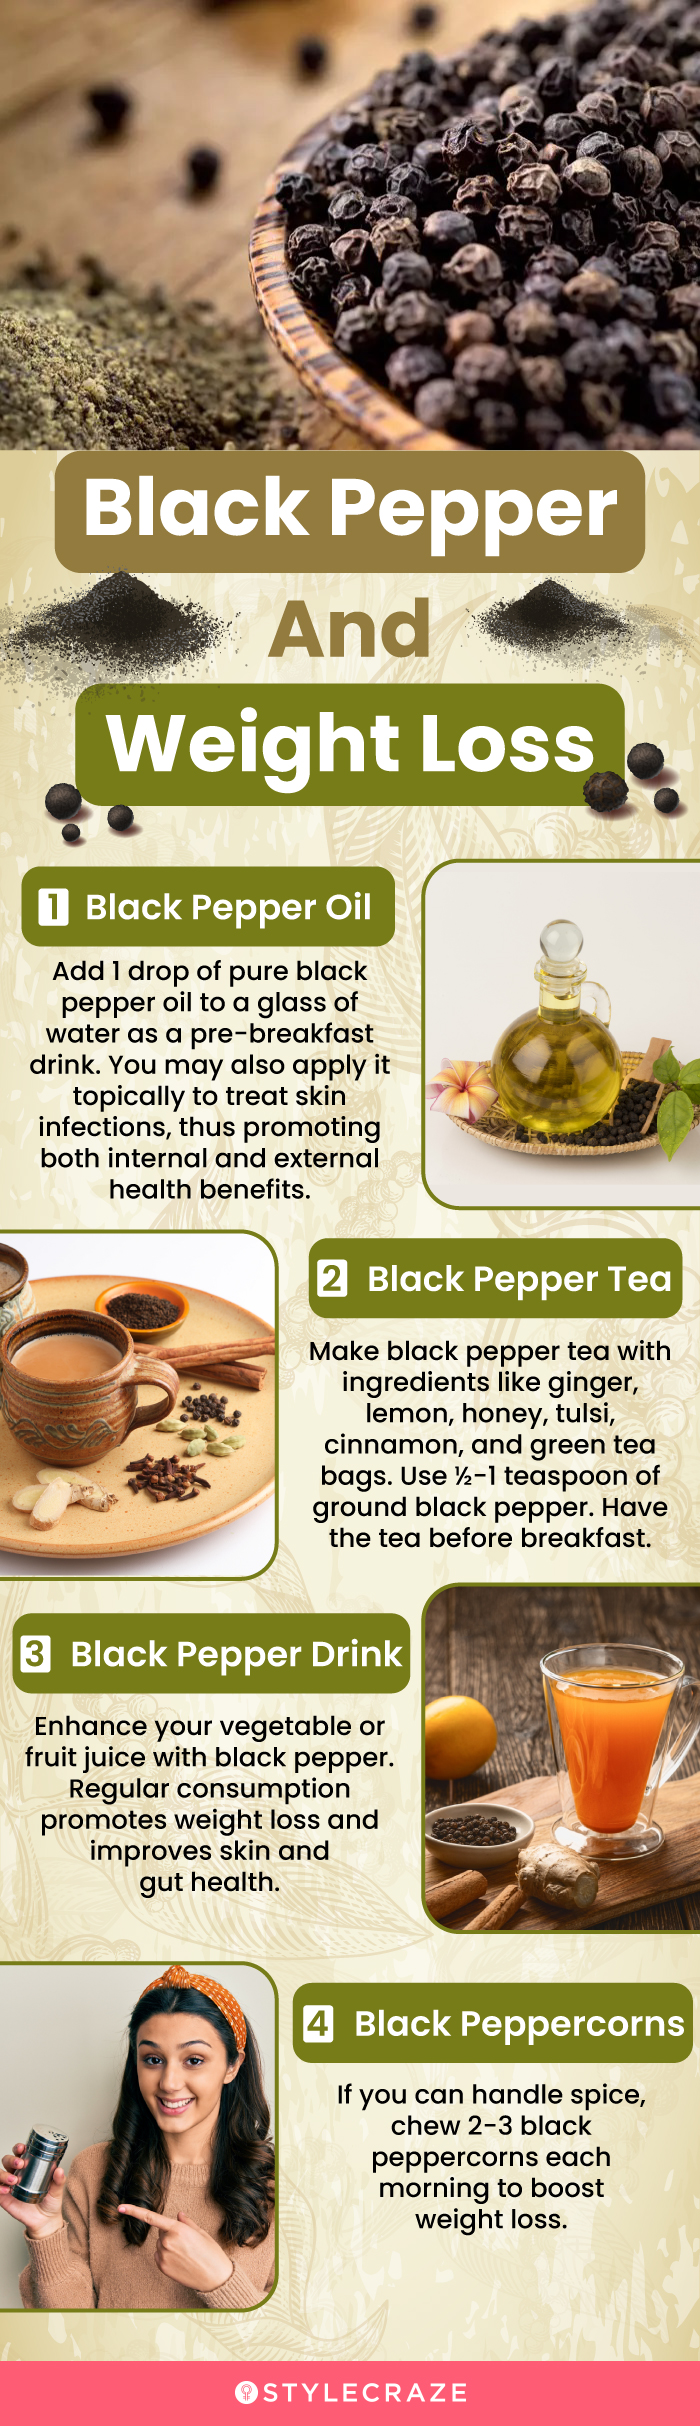 black pepper and weight loss (infographic)